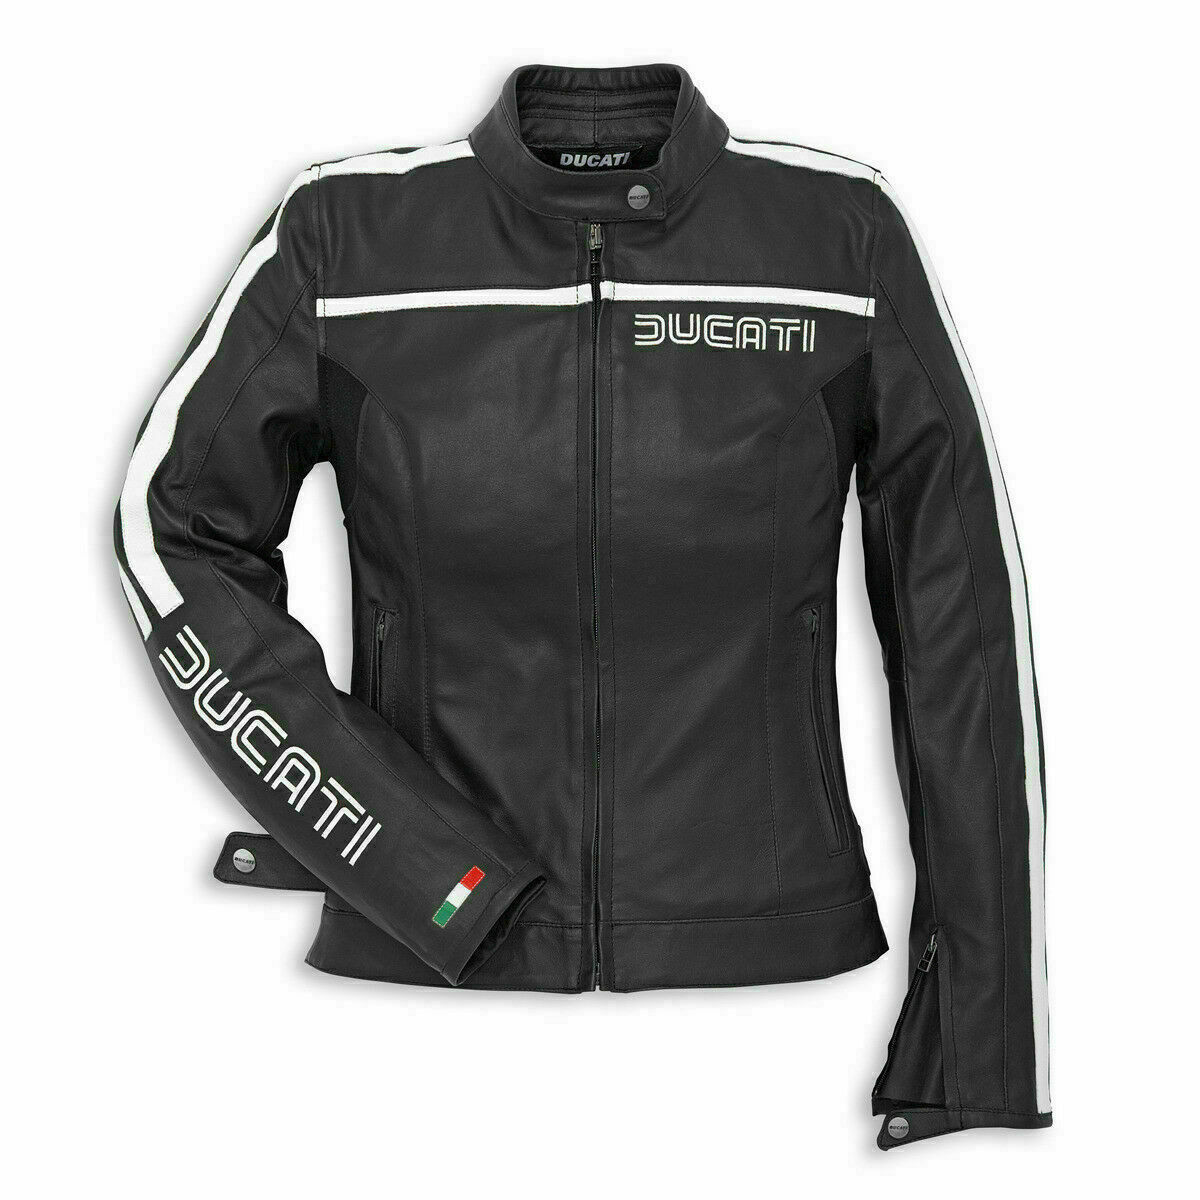  abroad postage included high quality Ducati * Corse Ducati Corse racing leather jacket MOTOGP size all sorts replica 9